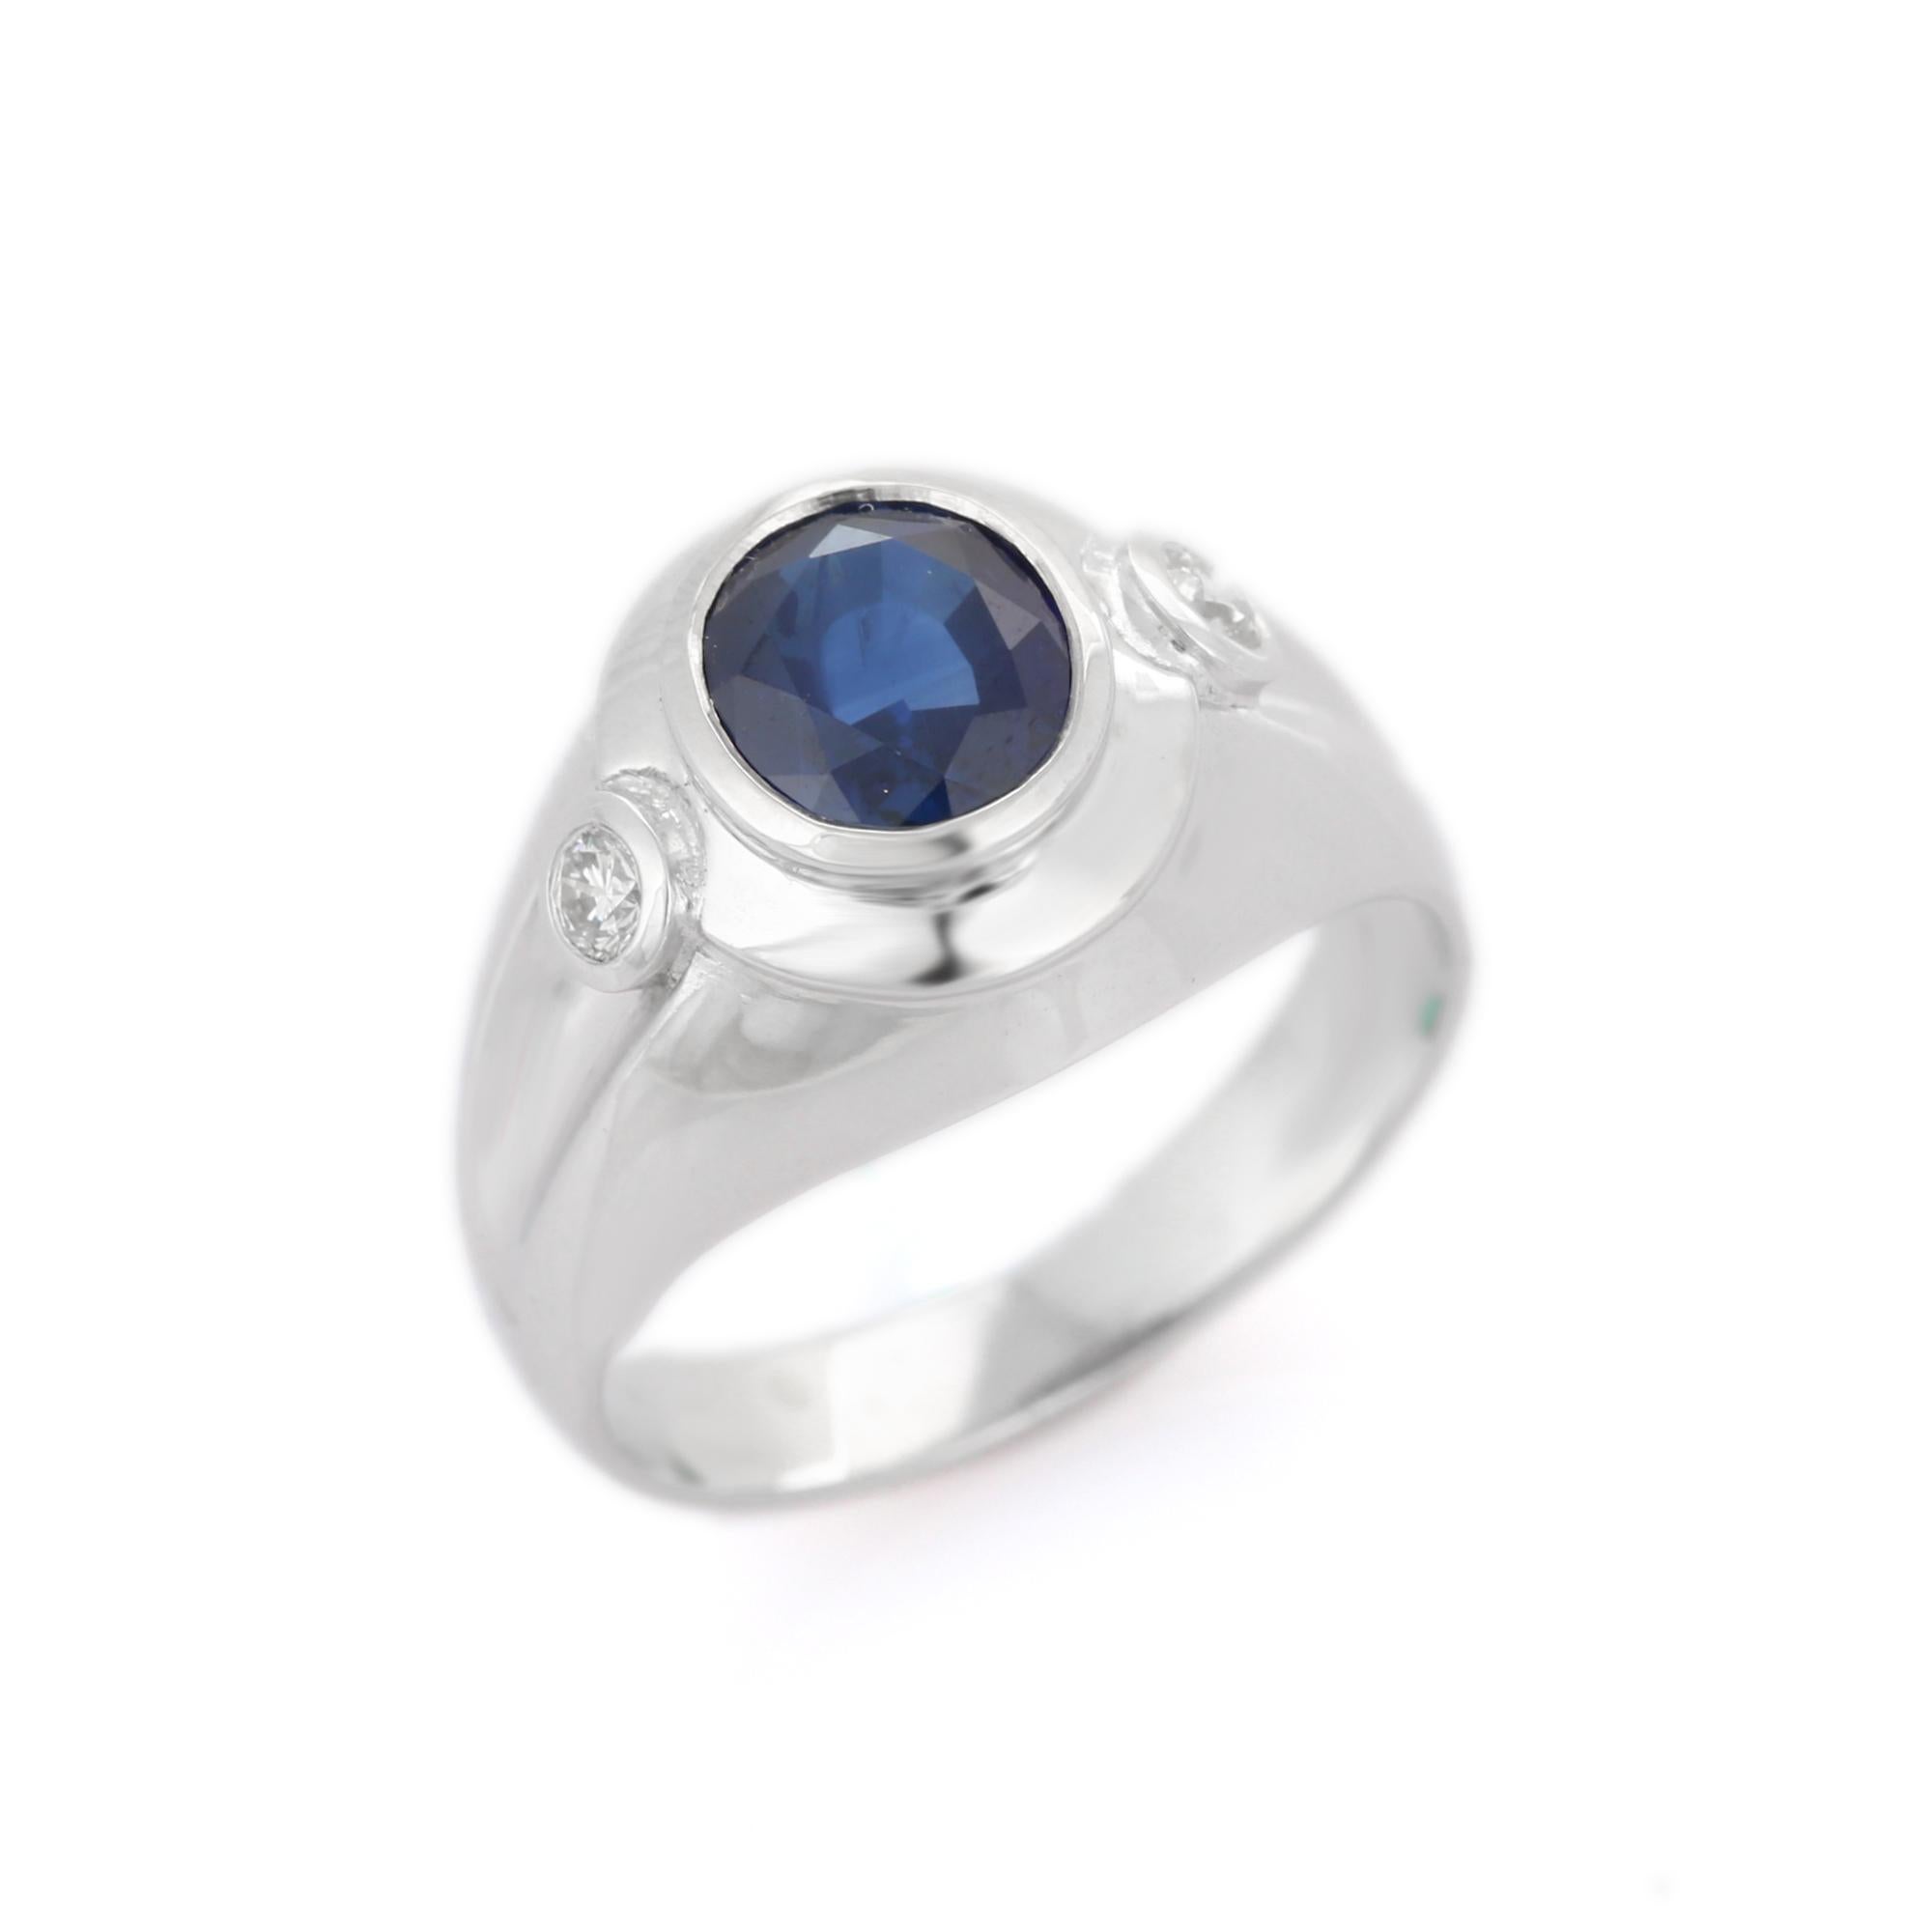 For Sale:  18k Solid White Gold Unisex Statement Ring with Blue Sapphire and Diamonds 5